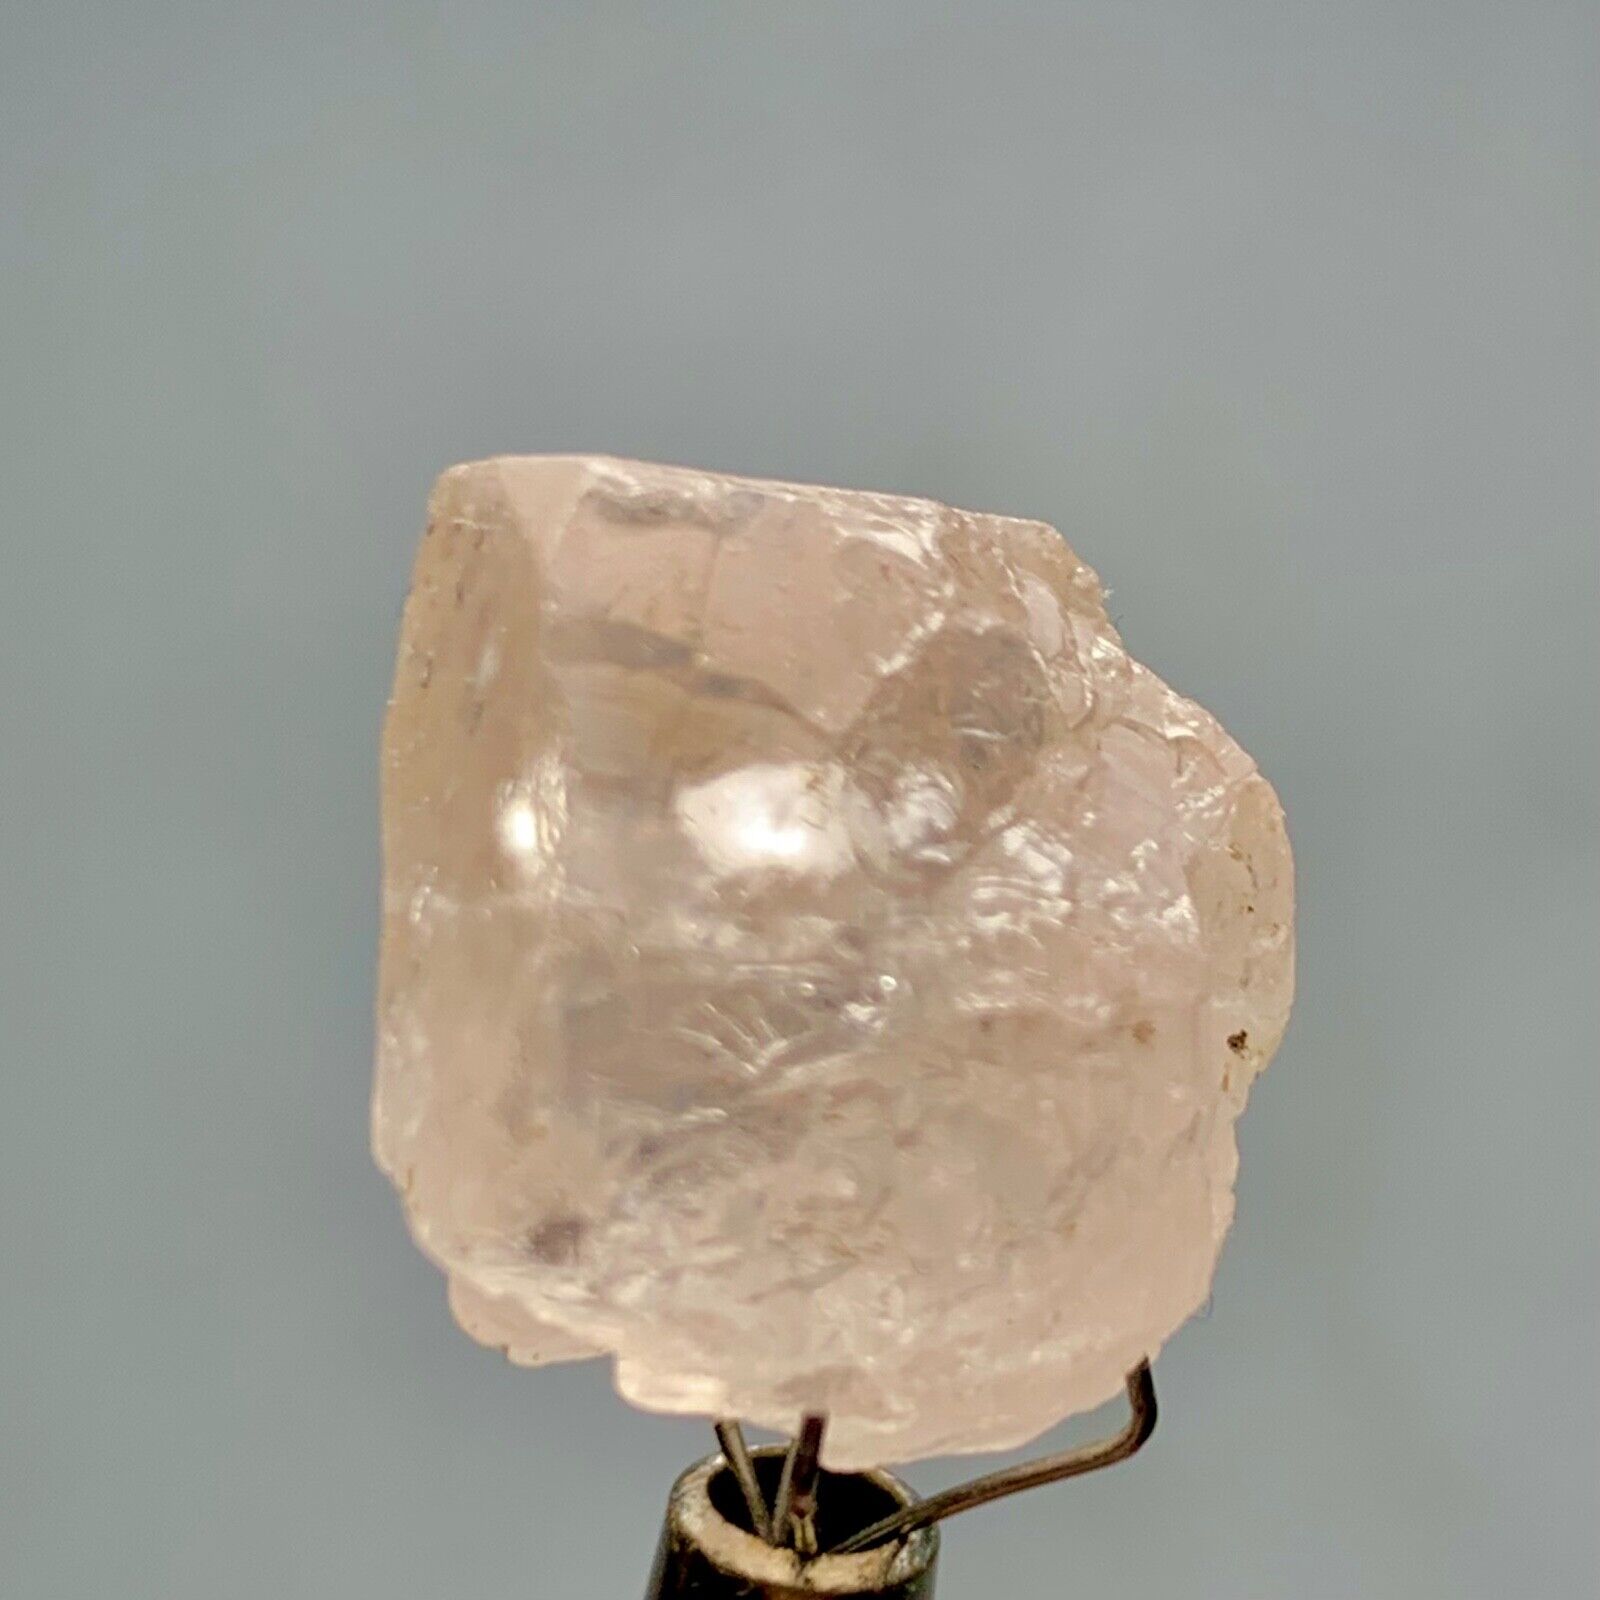 23 Cts Beautiful Termineted Morganite  Crystal from Afghanistan